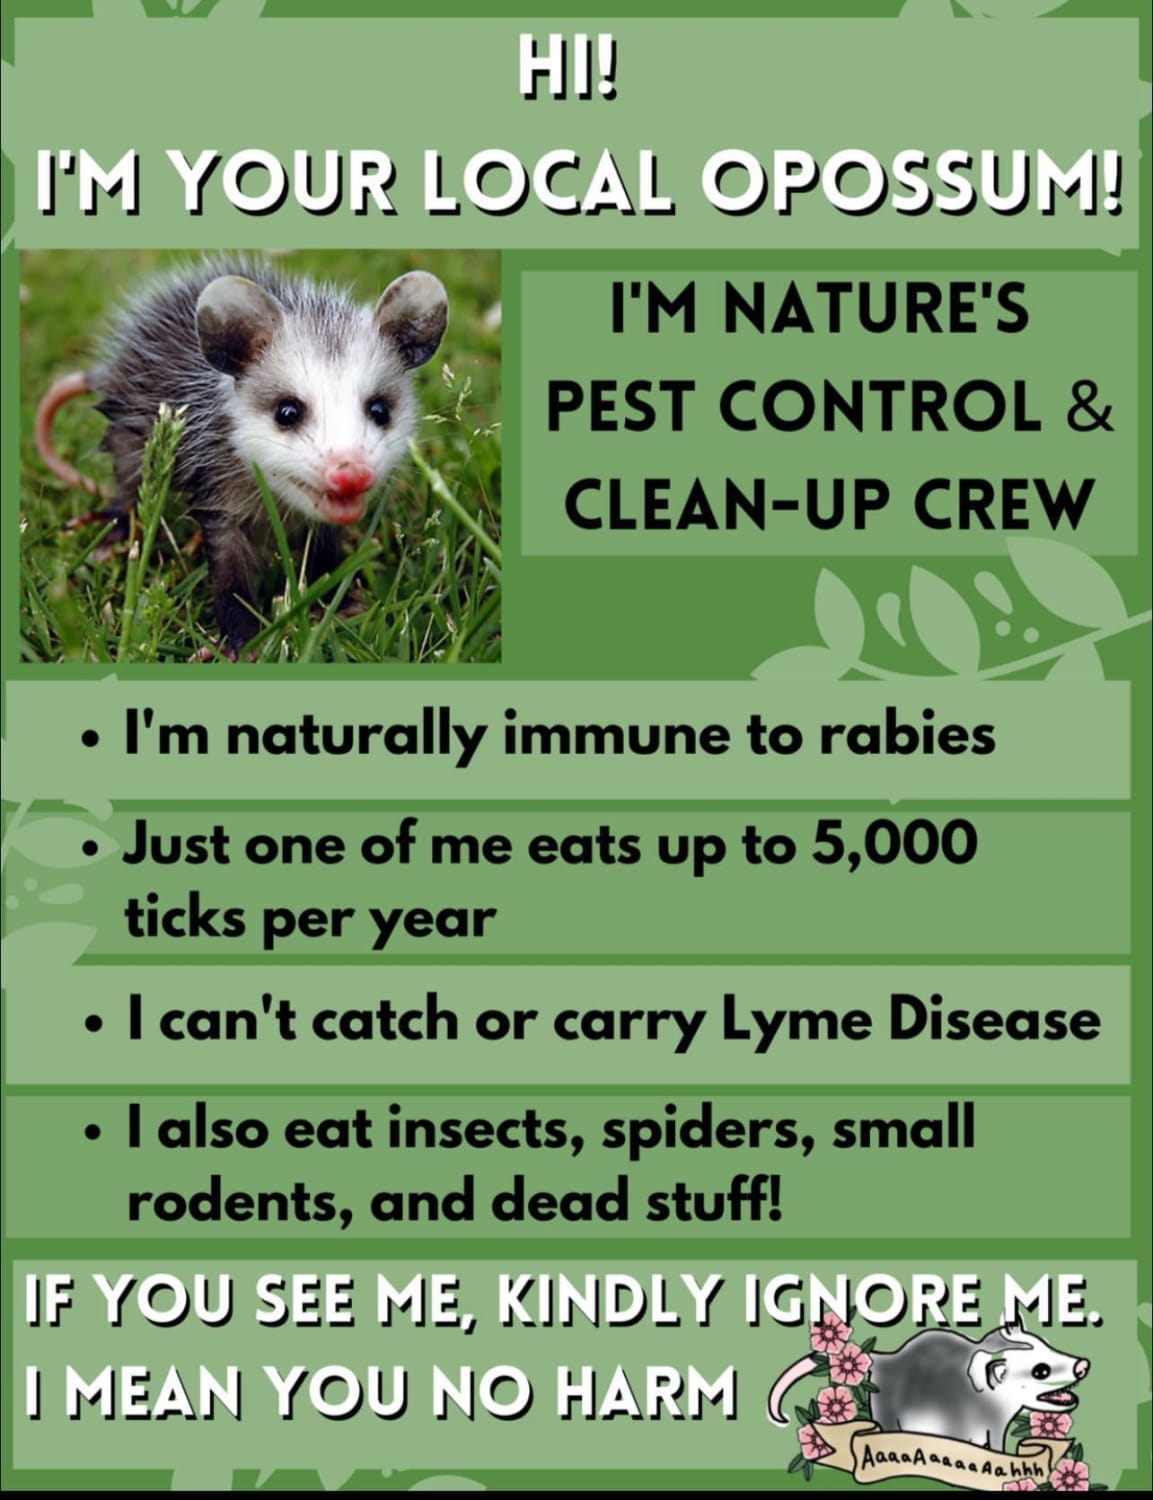 Opossums are our friends